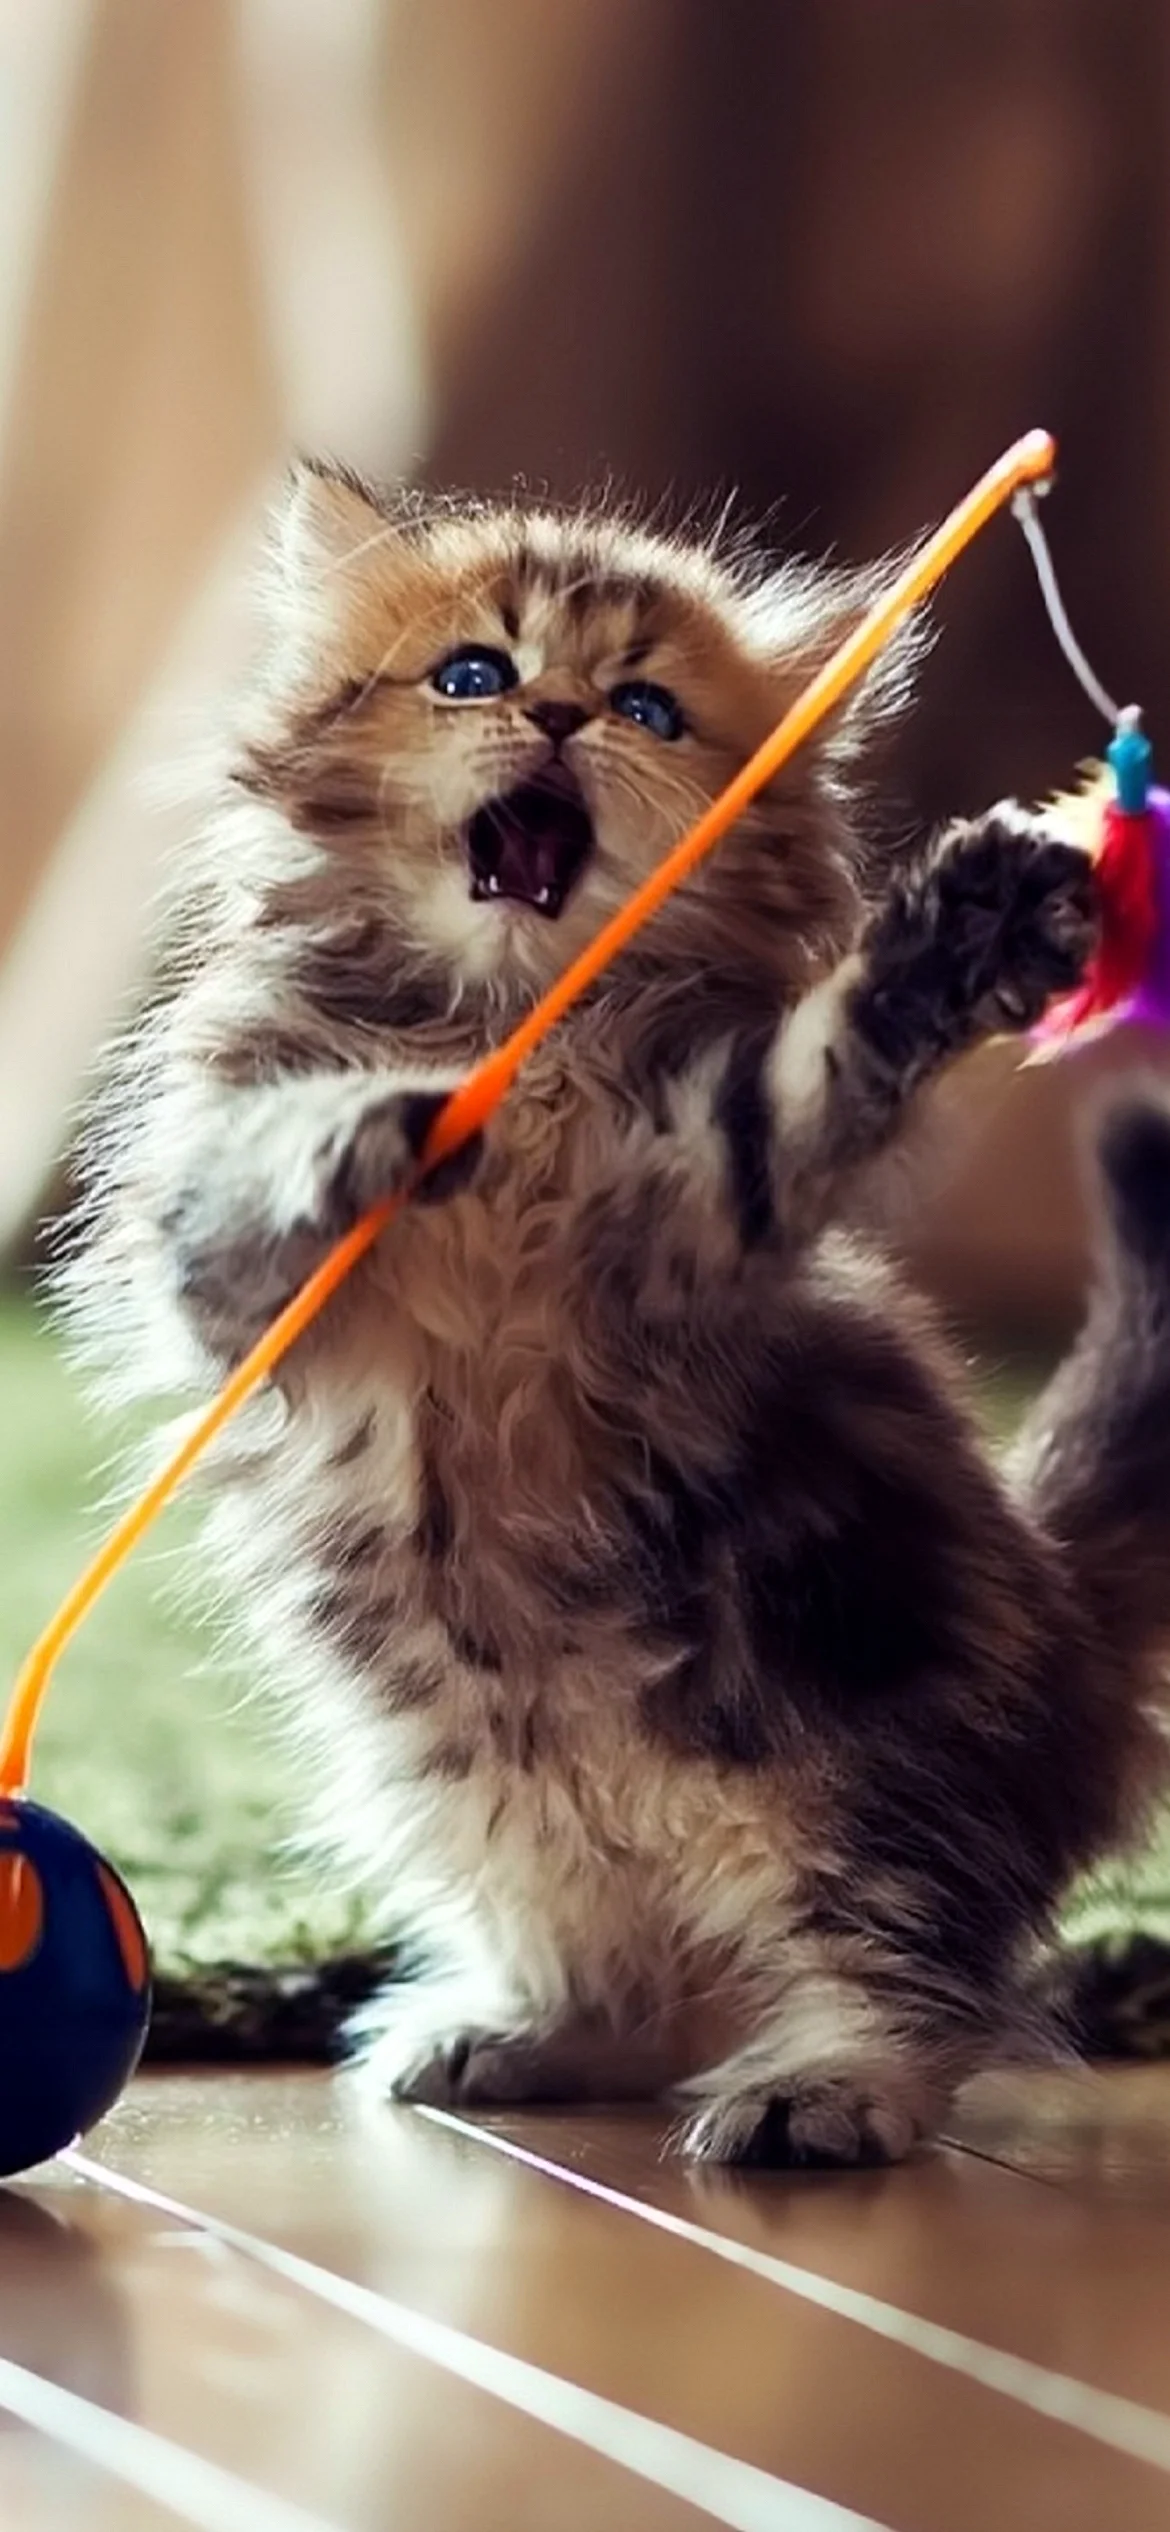 Cute Cat Wallpaper for iPhone 12 Pro